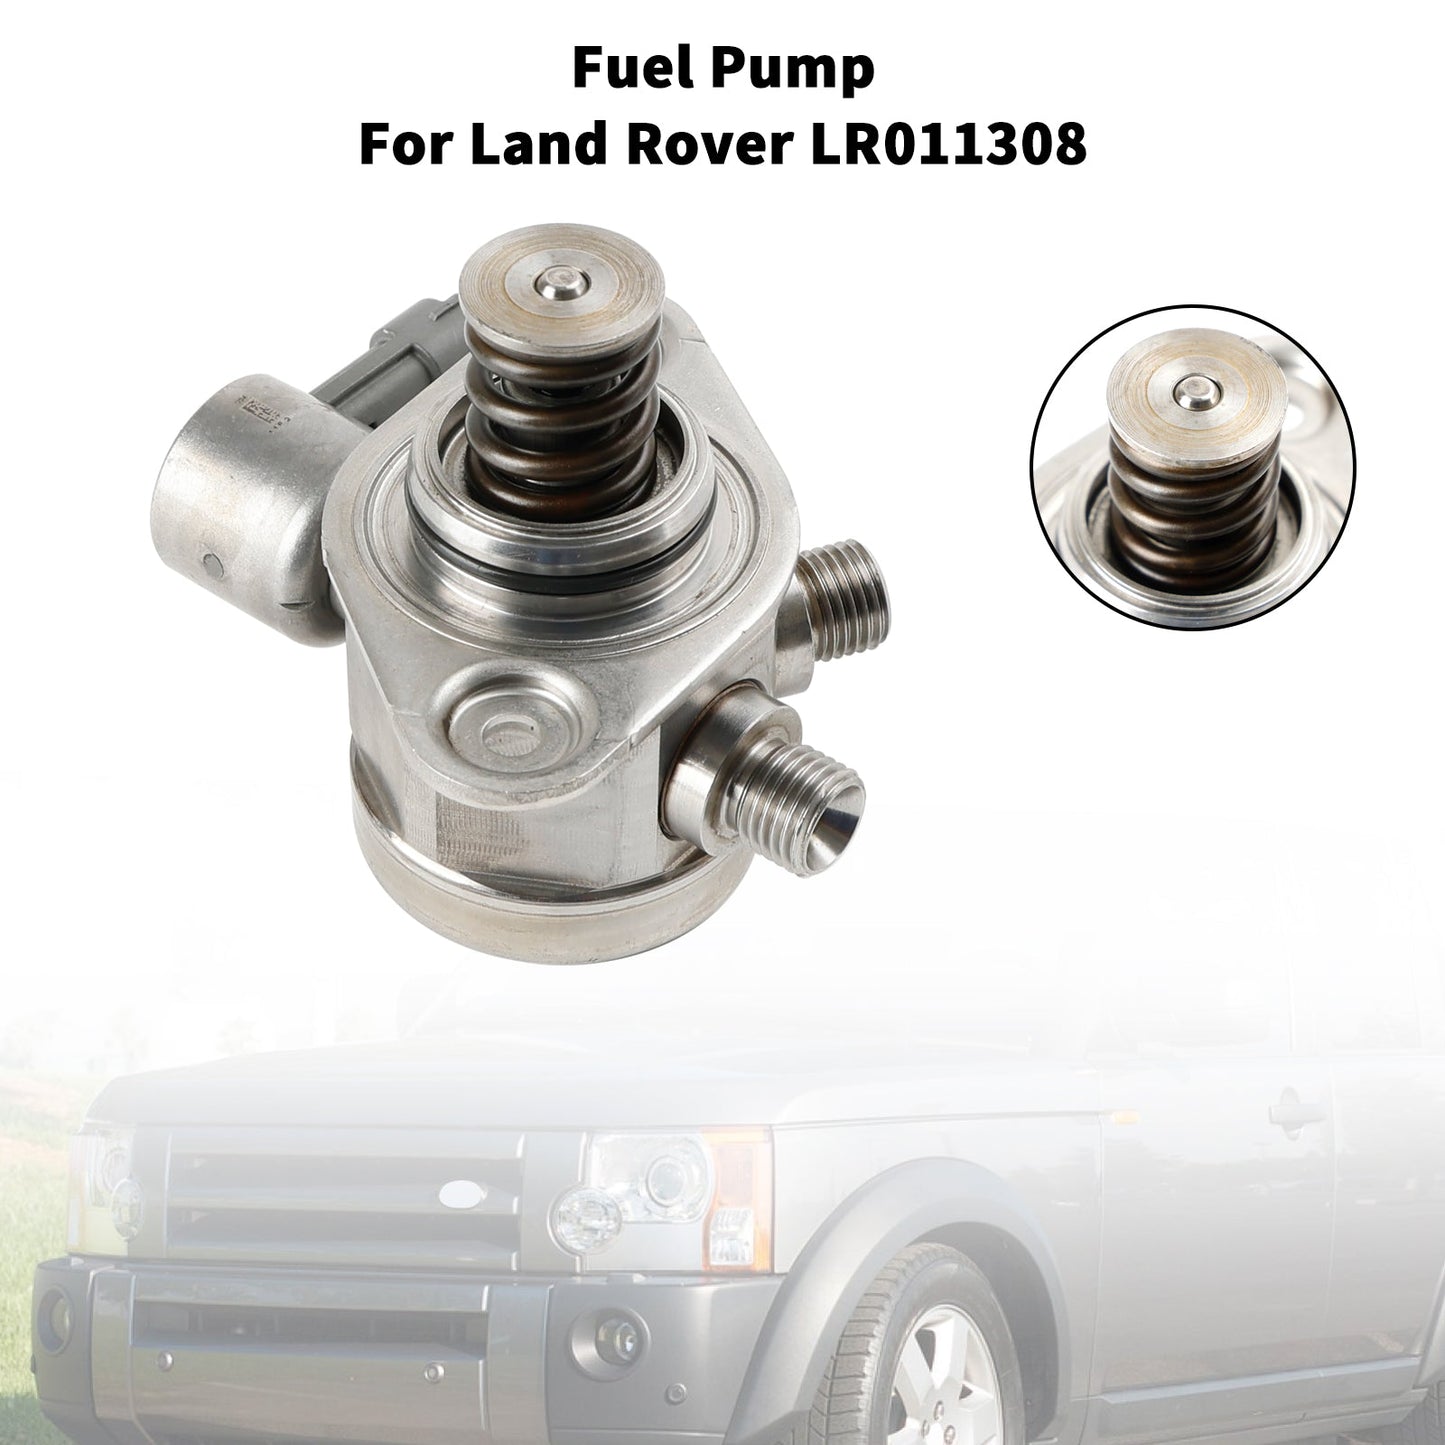 Range Rover Sport 5.0L High Pressure Fuel Pump Fit Land Rover Discovery IV